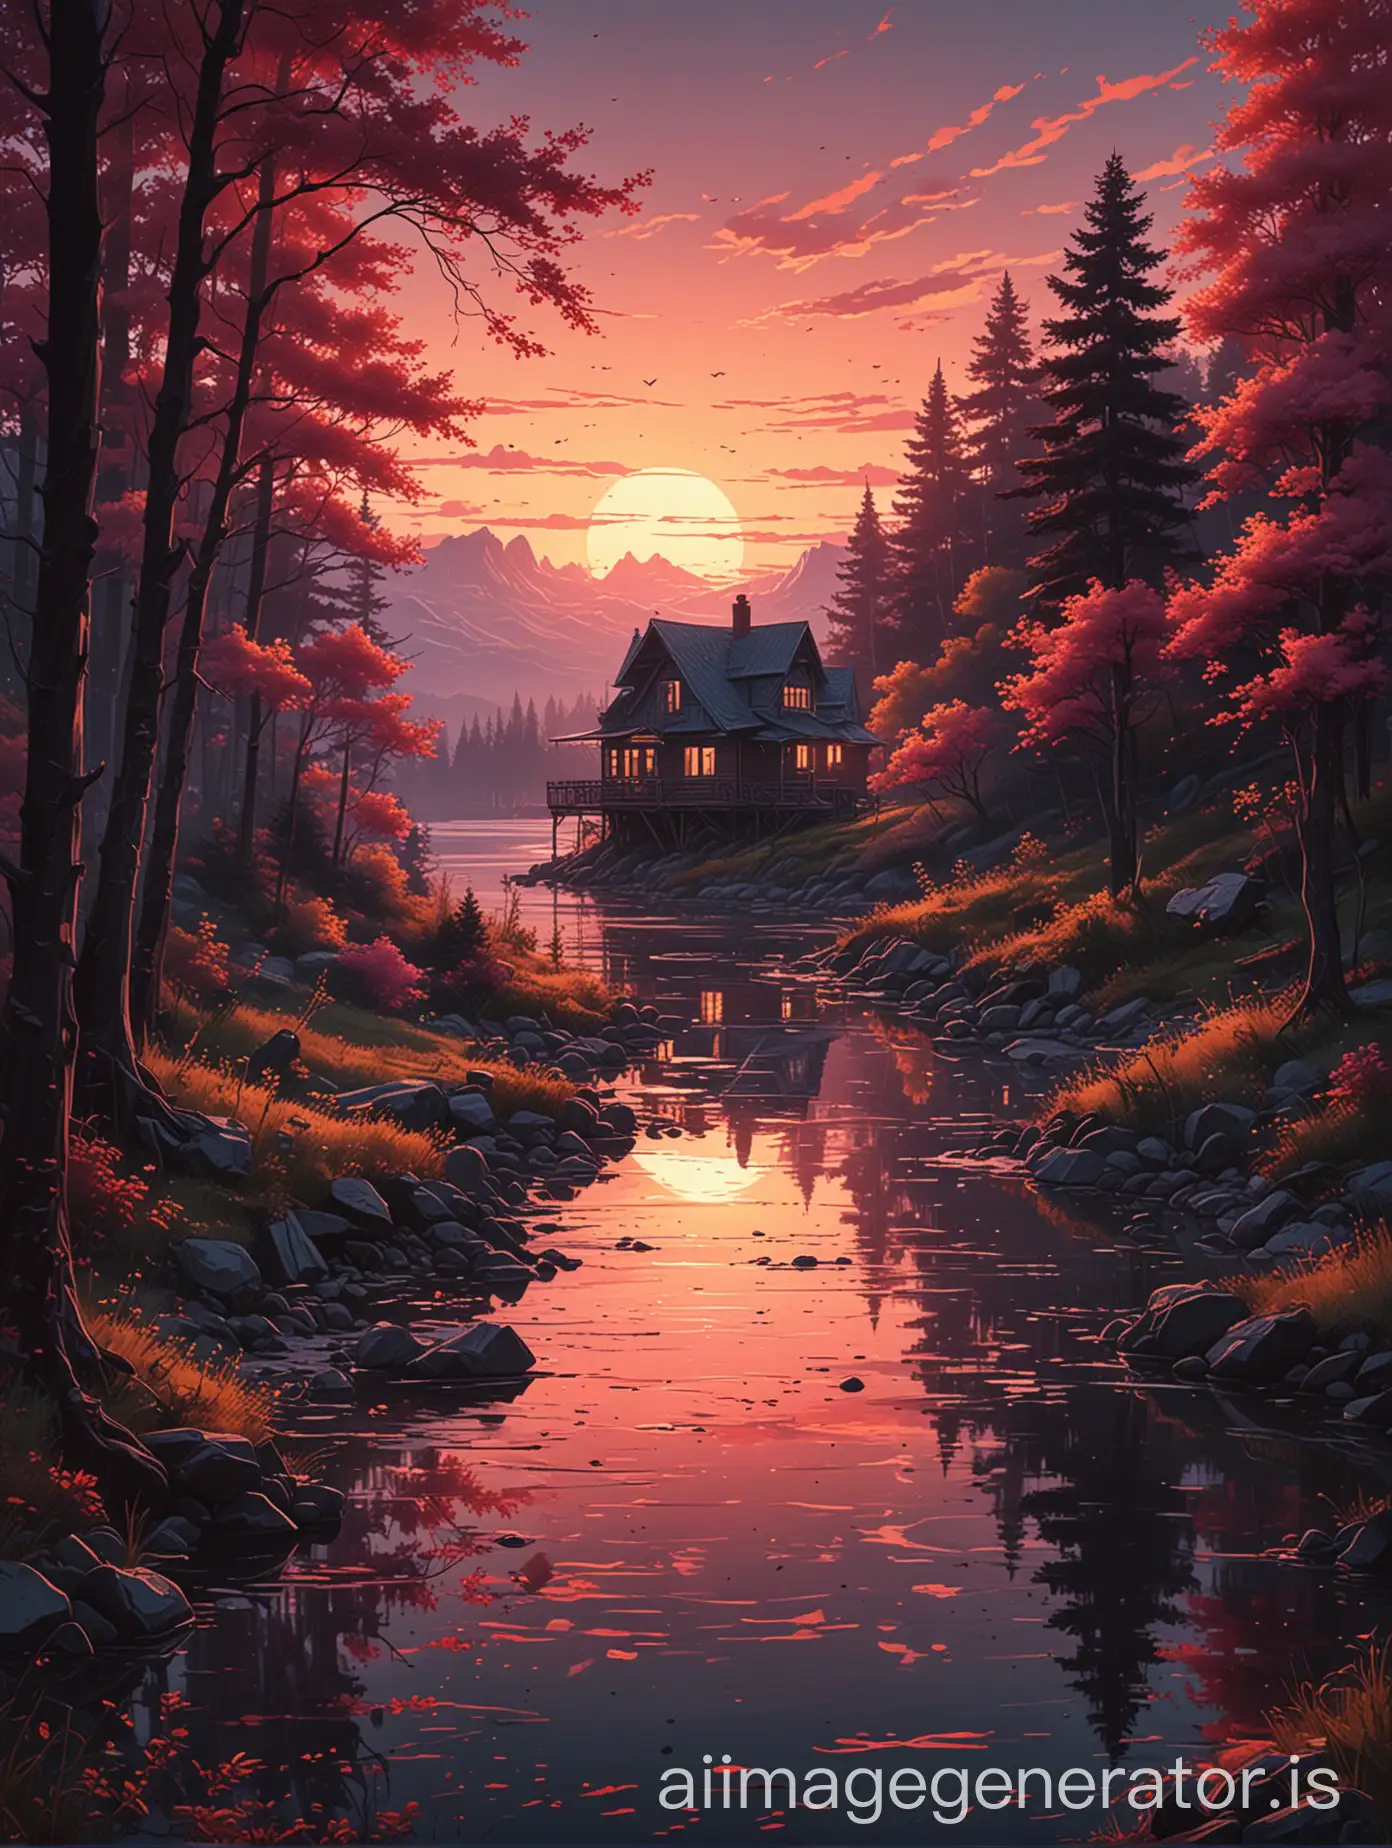 Scenic-Sunset-Painting-with-Trees-and-House-Dreamy-Landscape-Art